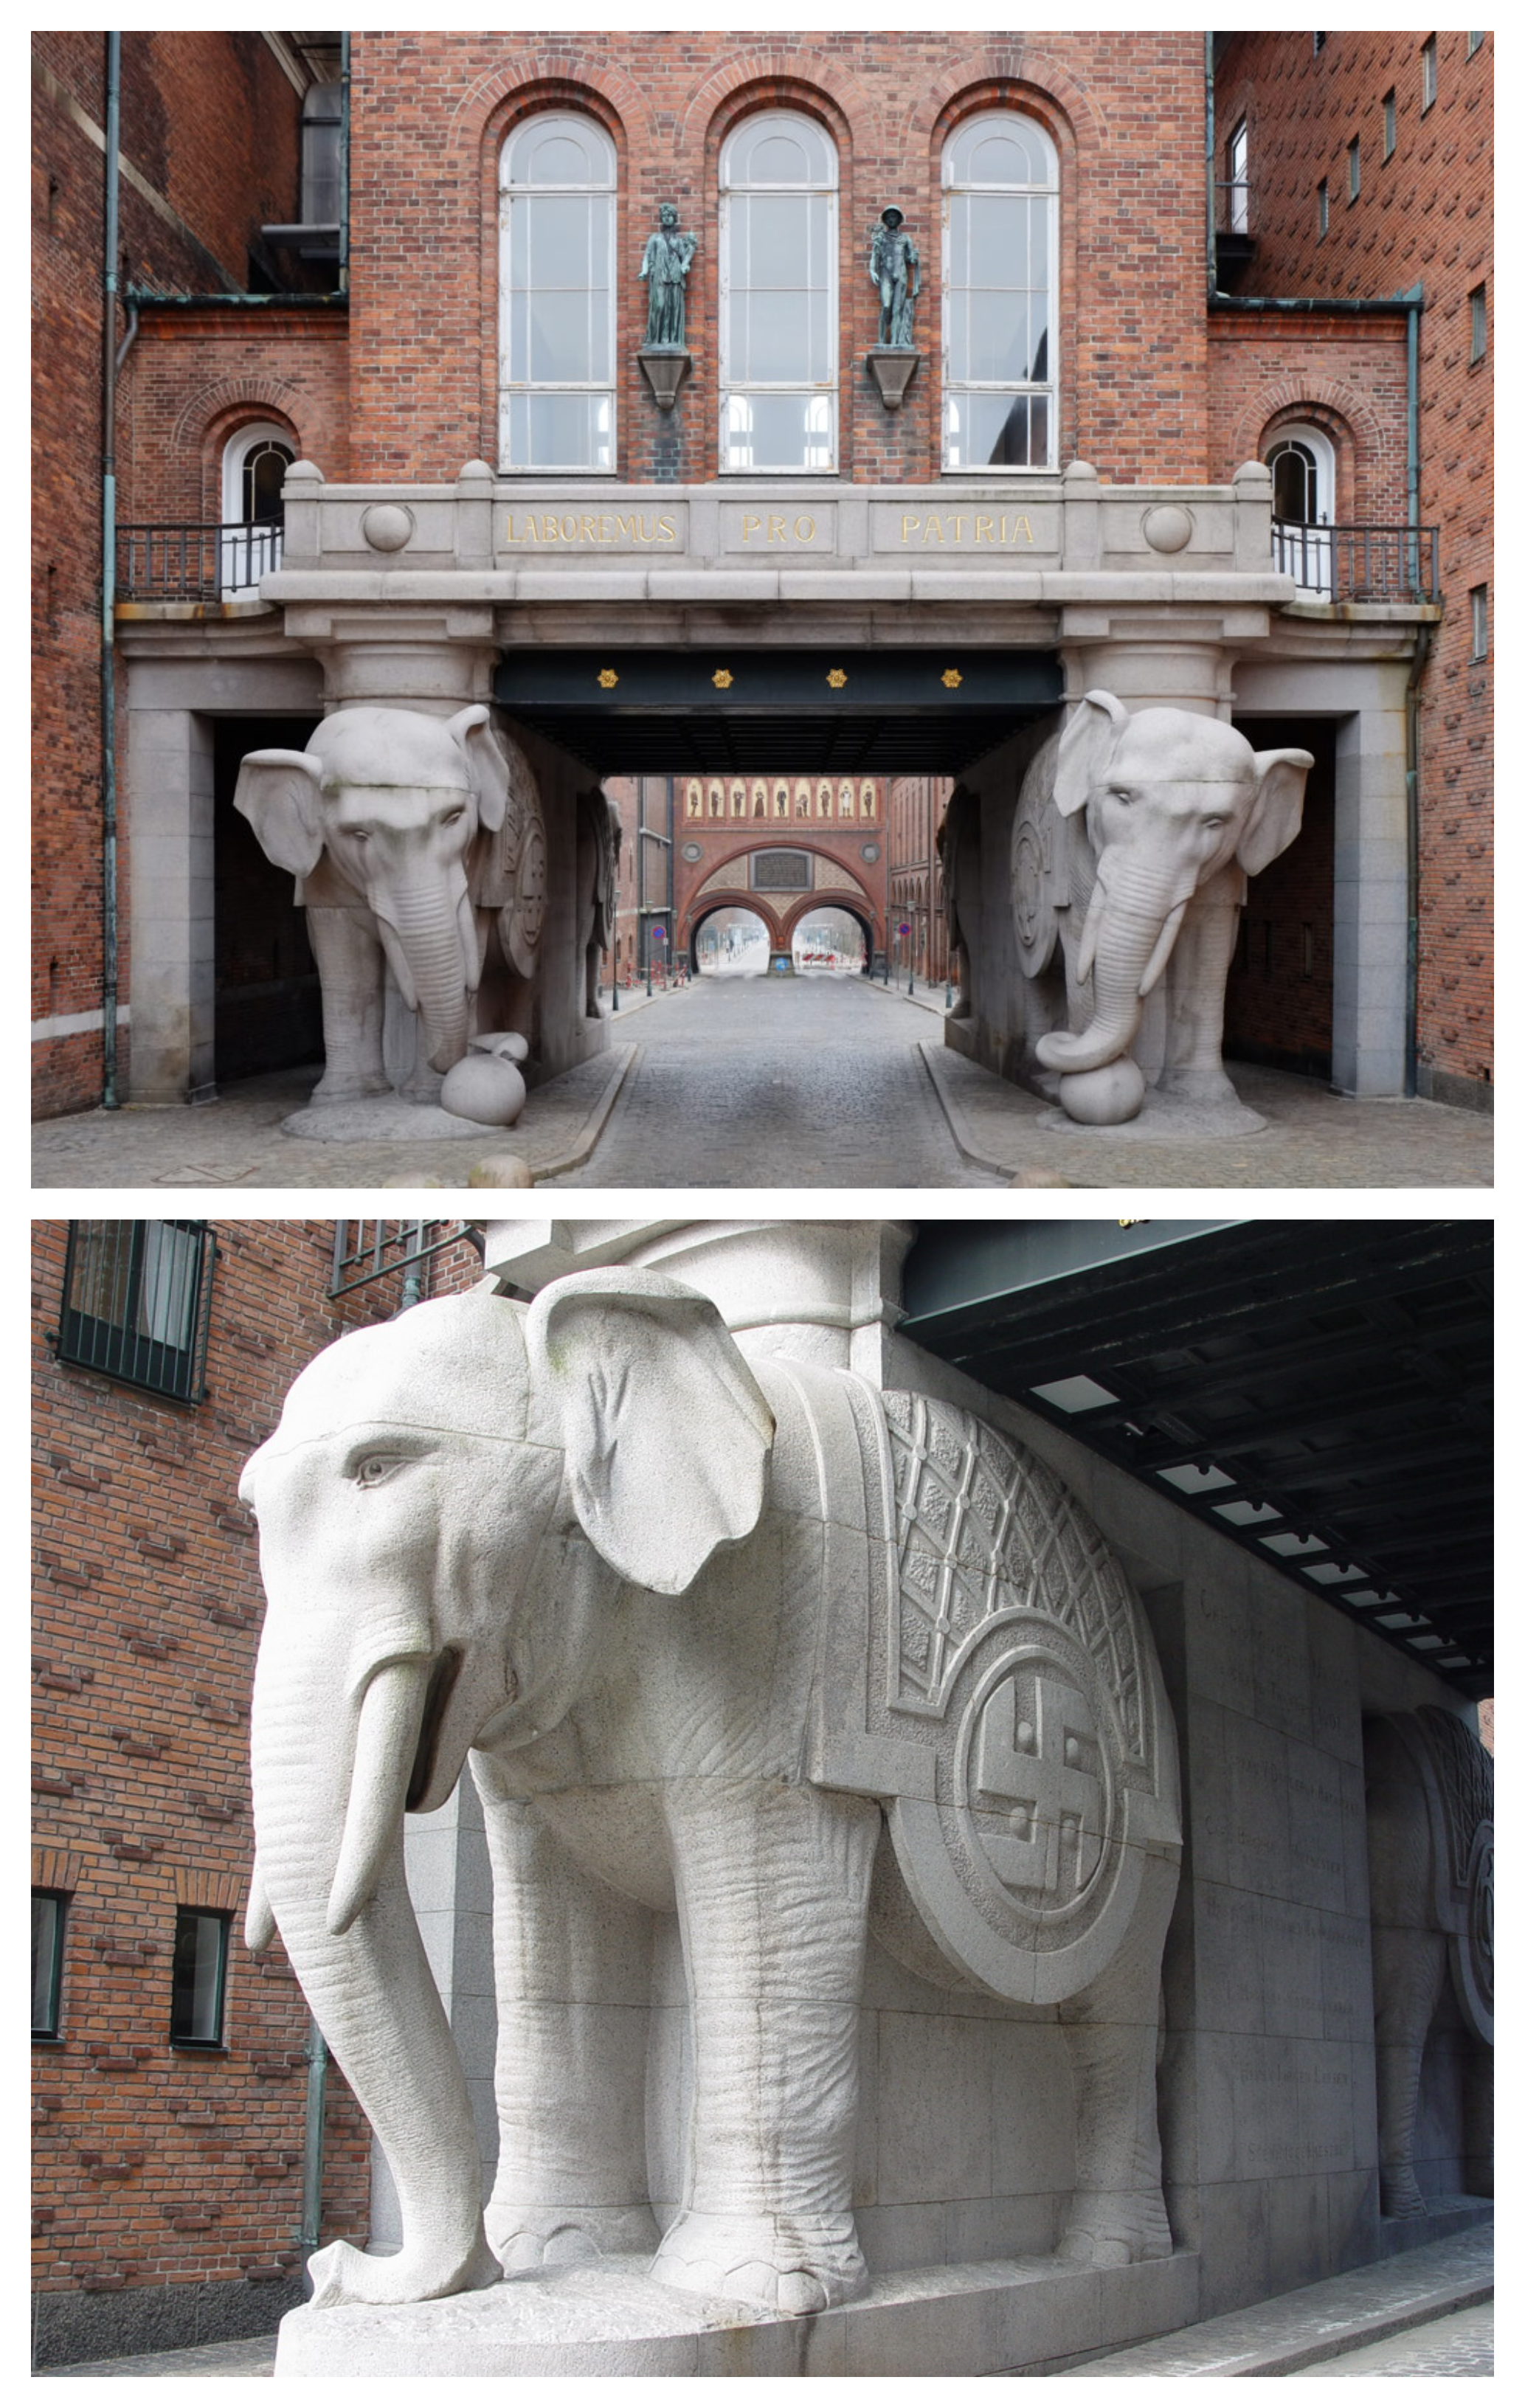 The Elephant Gate (entrance) at Carlsberg Brewery, Copenhagen, Denmark. Architect Vilhelm Dahlerup, 1901. Made out of granite from the island of Bornholm.png